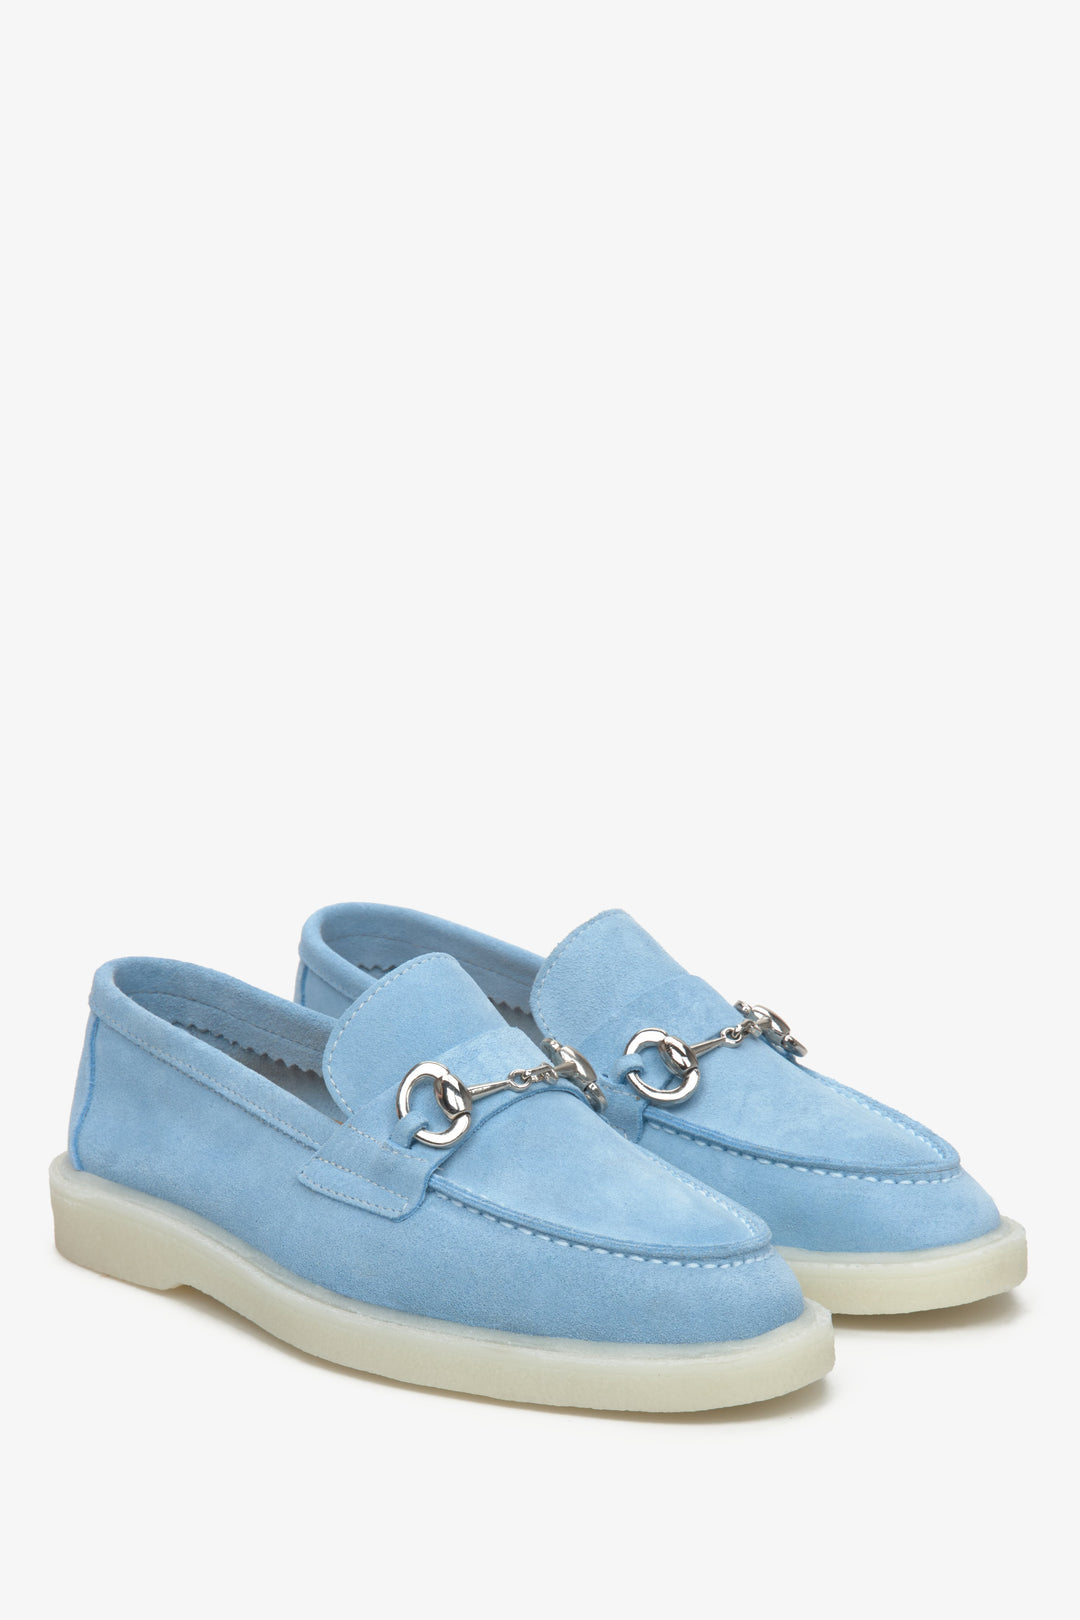 Women's Light Blue Velour Loafers with Gold Buckle Estro ER00113259